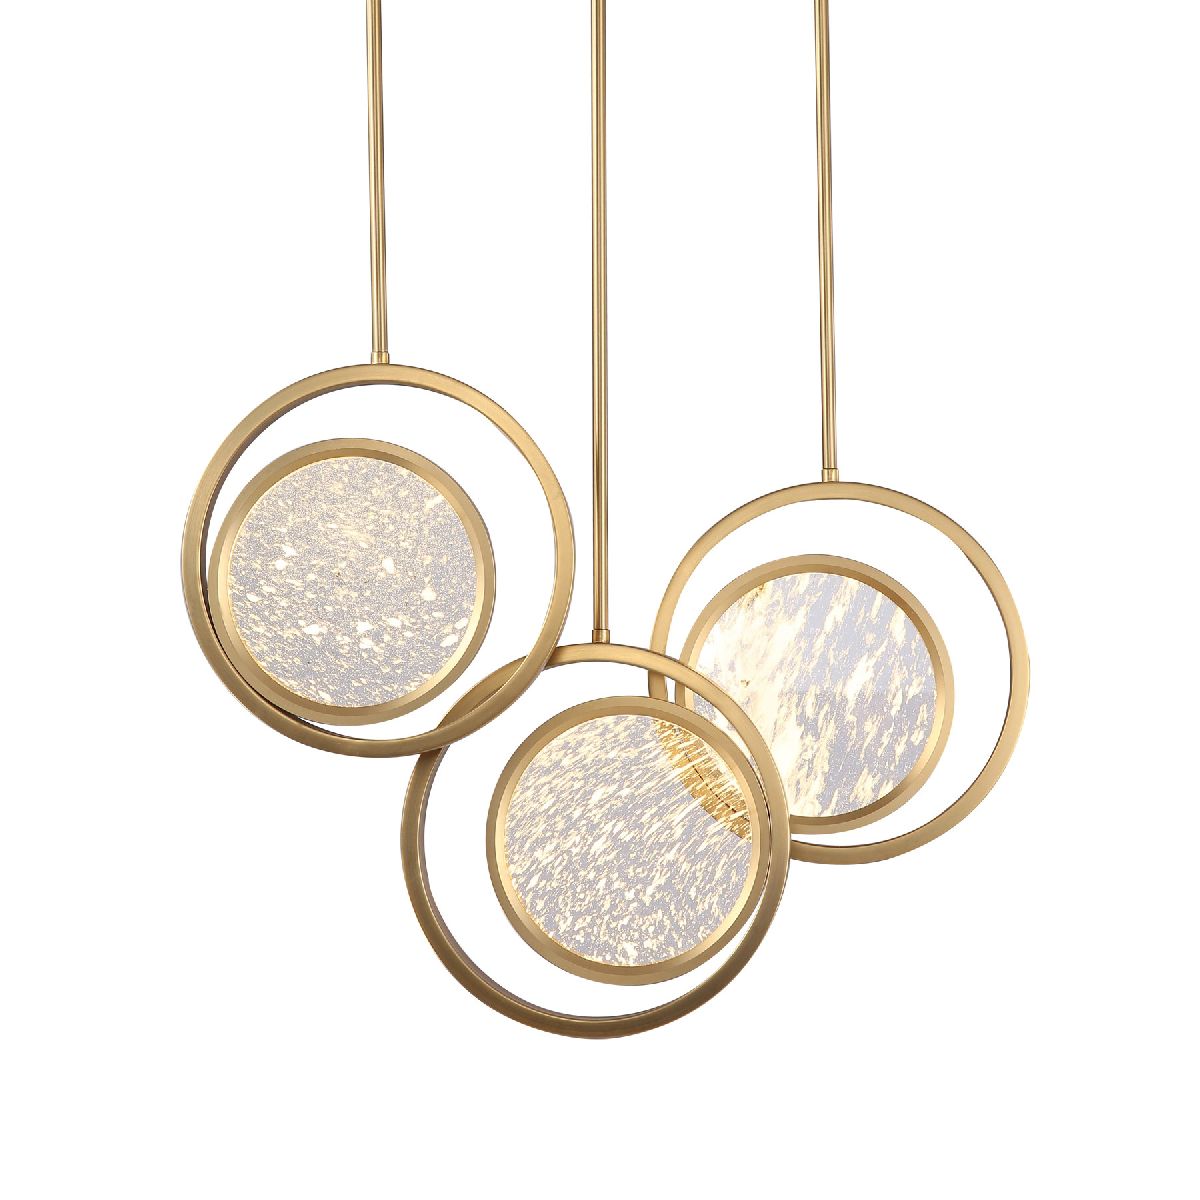 Подвесной светильник DeLight Collection Moon Light MD8700-3A brushed gold